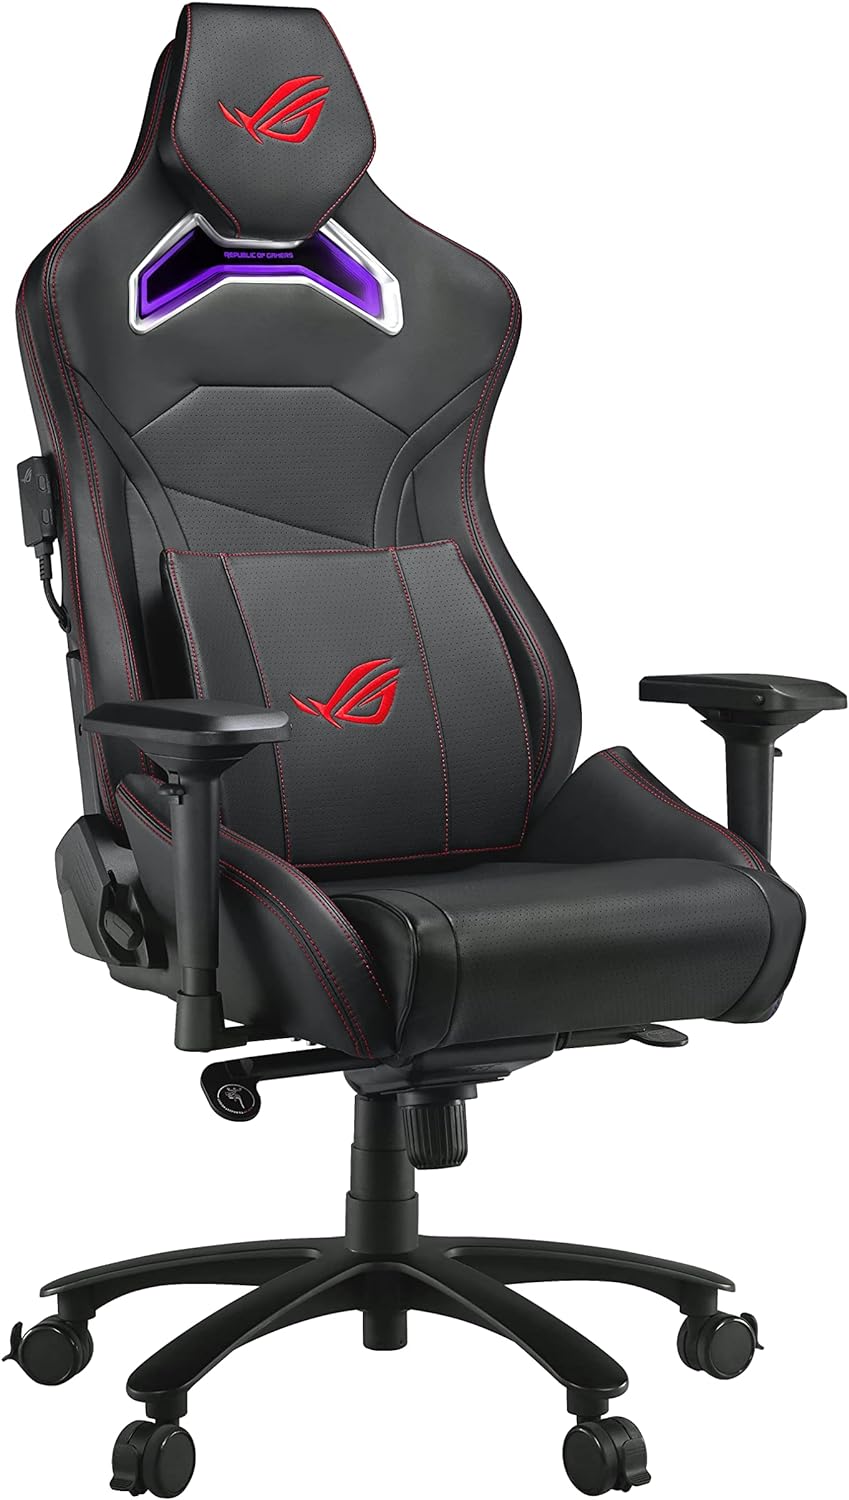 ASUS ROG Chariot Gaming Chair with RGB Lights in BLACK - Elevate your gaming setup with vibrant Aura RGB illumination. 4718017322782D